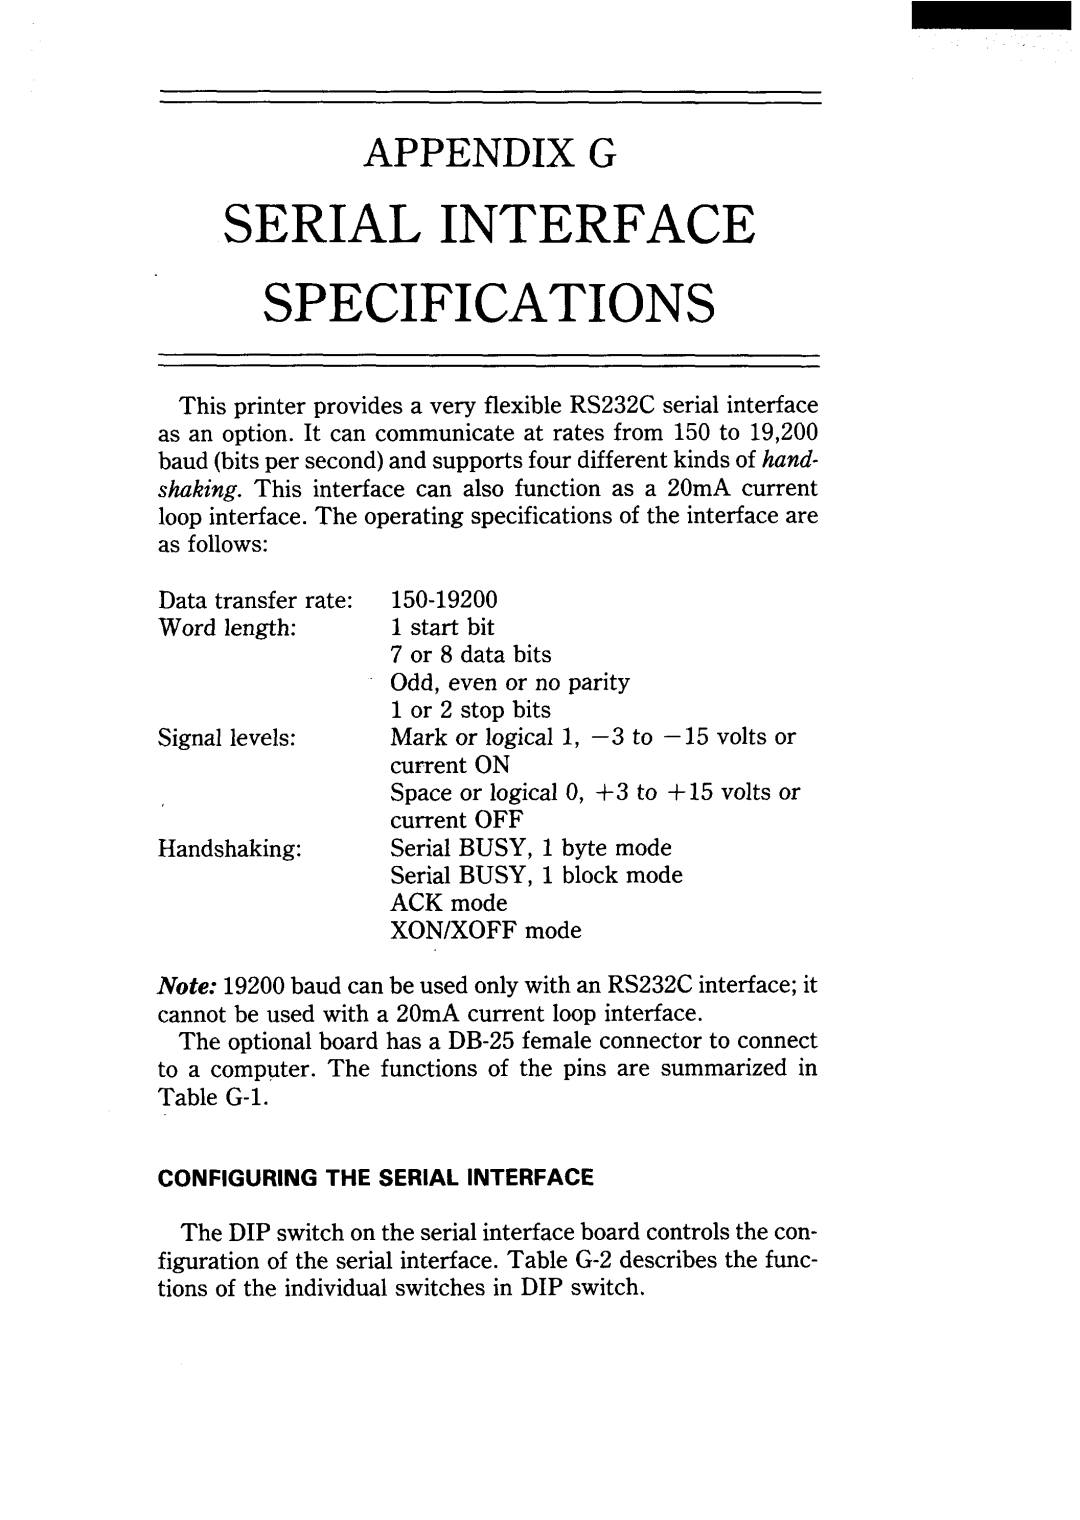 Star Micronics NX-15 user manual Serial Interface Specifications, Appendix G 